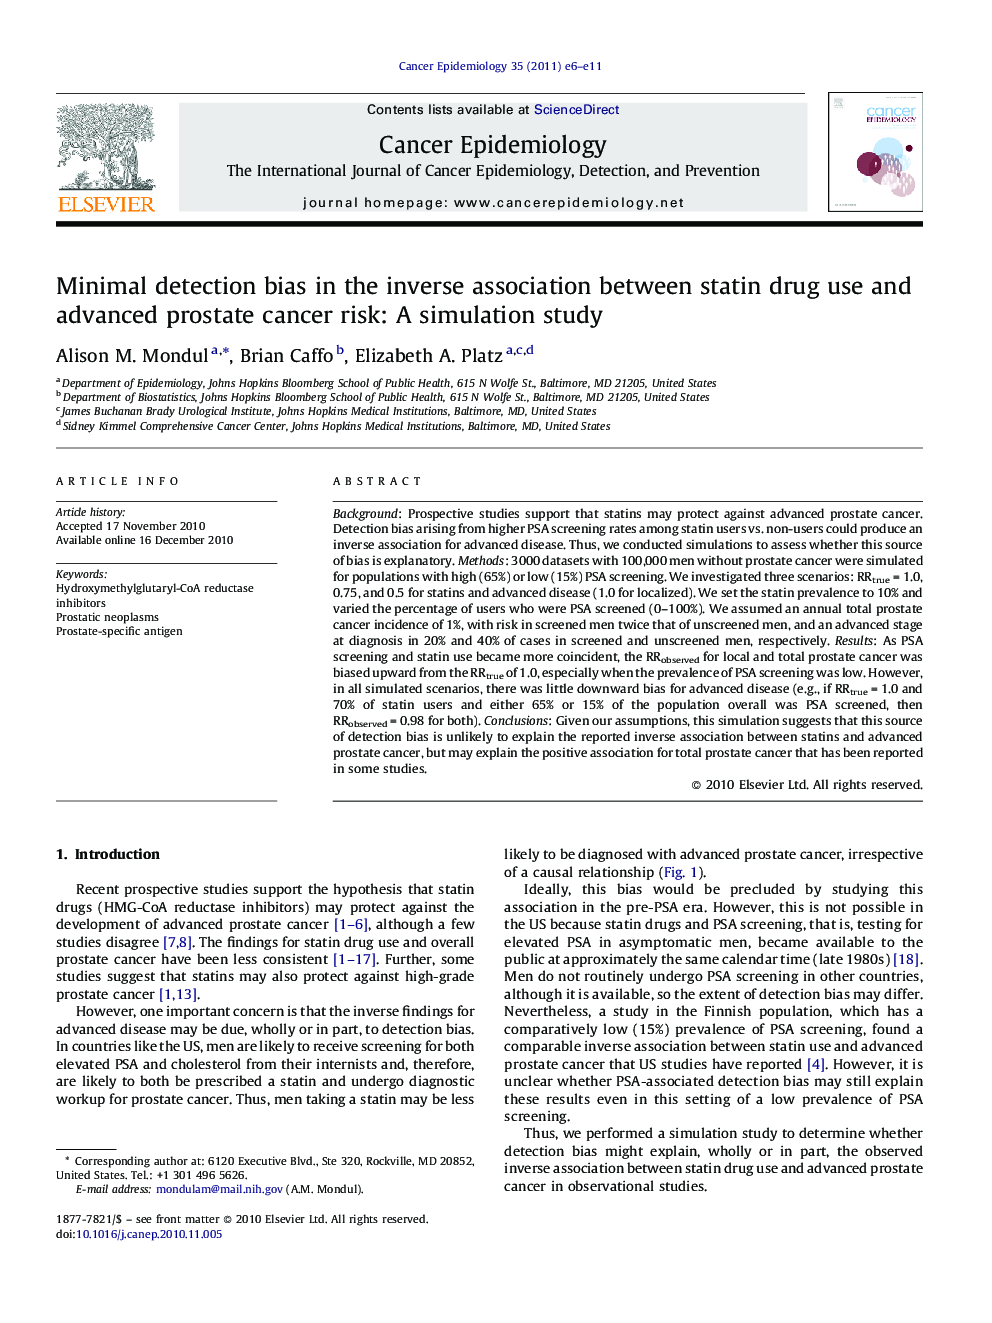 Minimal detection bias in the inverse association between statin drug use and advanced prostate cancer risk: A simulation study